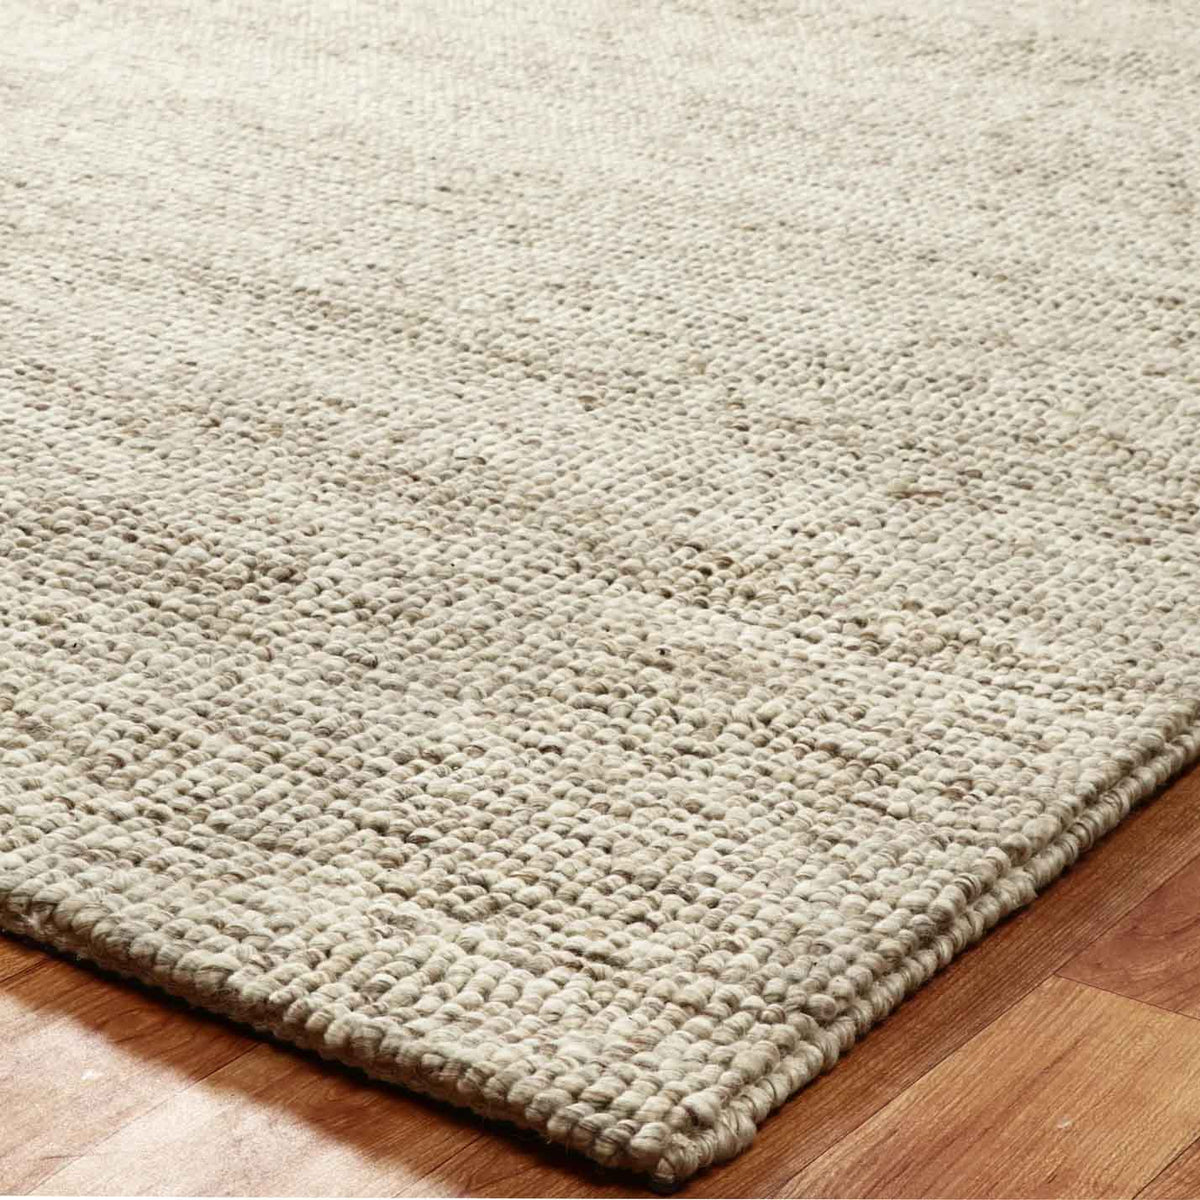 Pearl Oyster Textured Rug